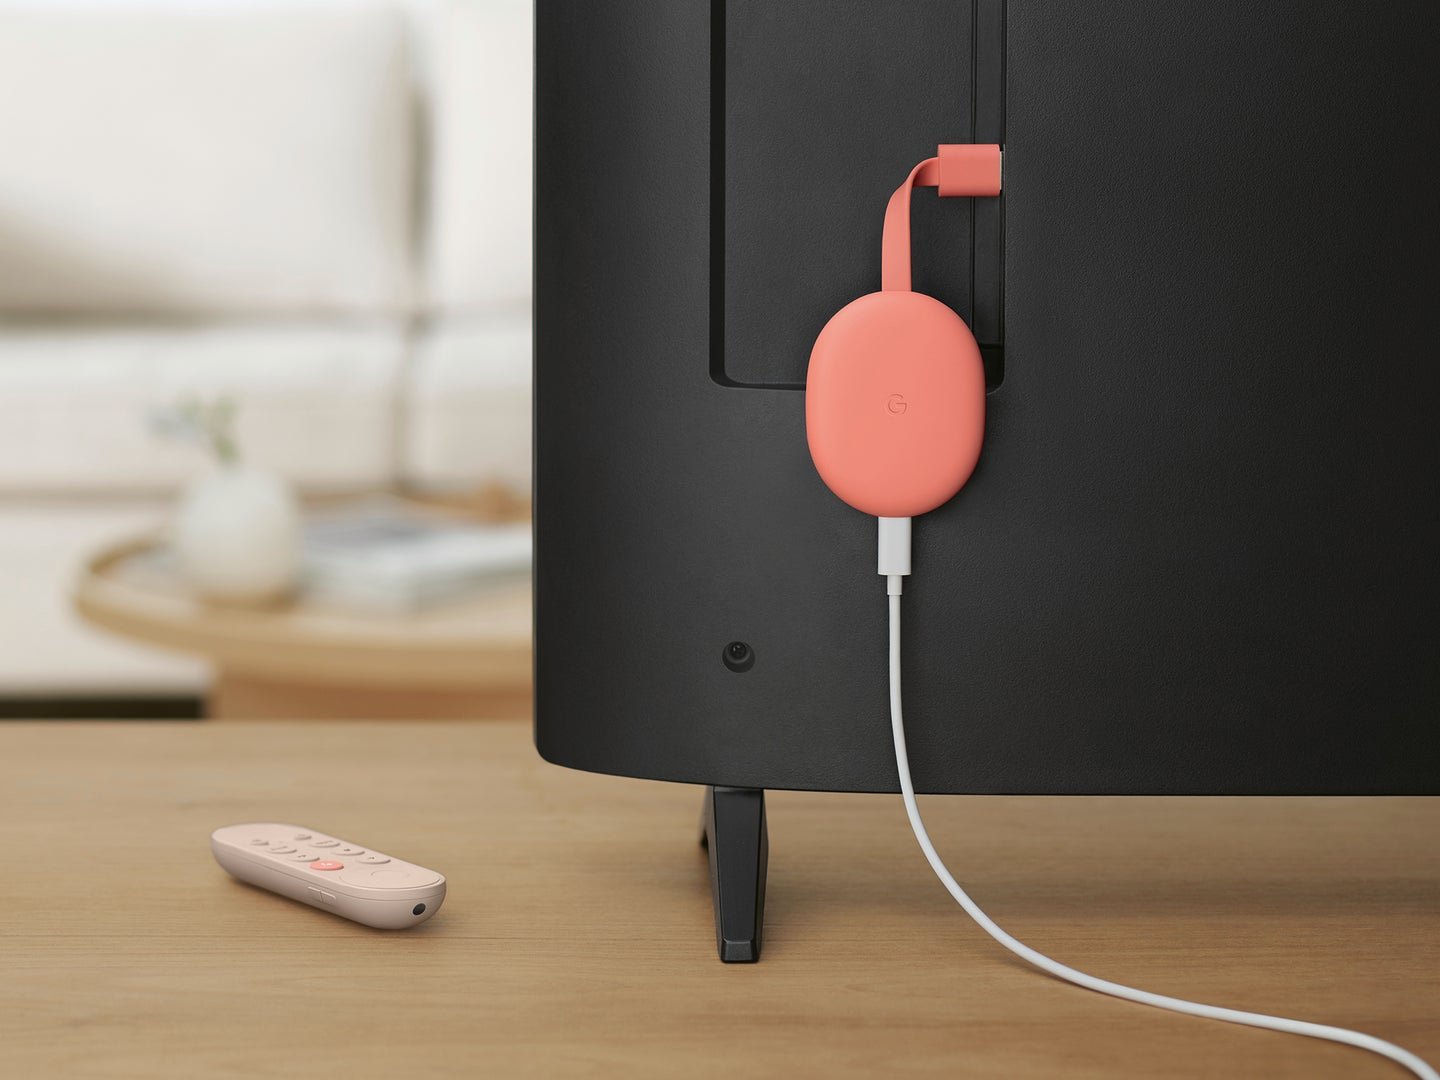 Outsmart your Chromecast and stream anything you want